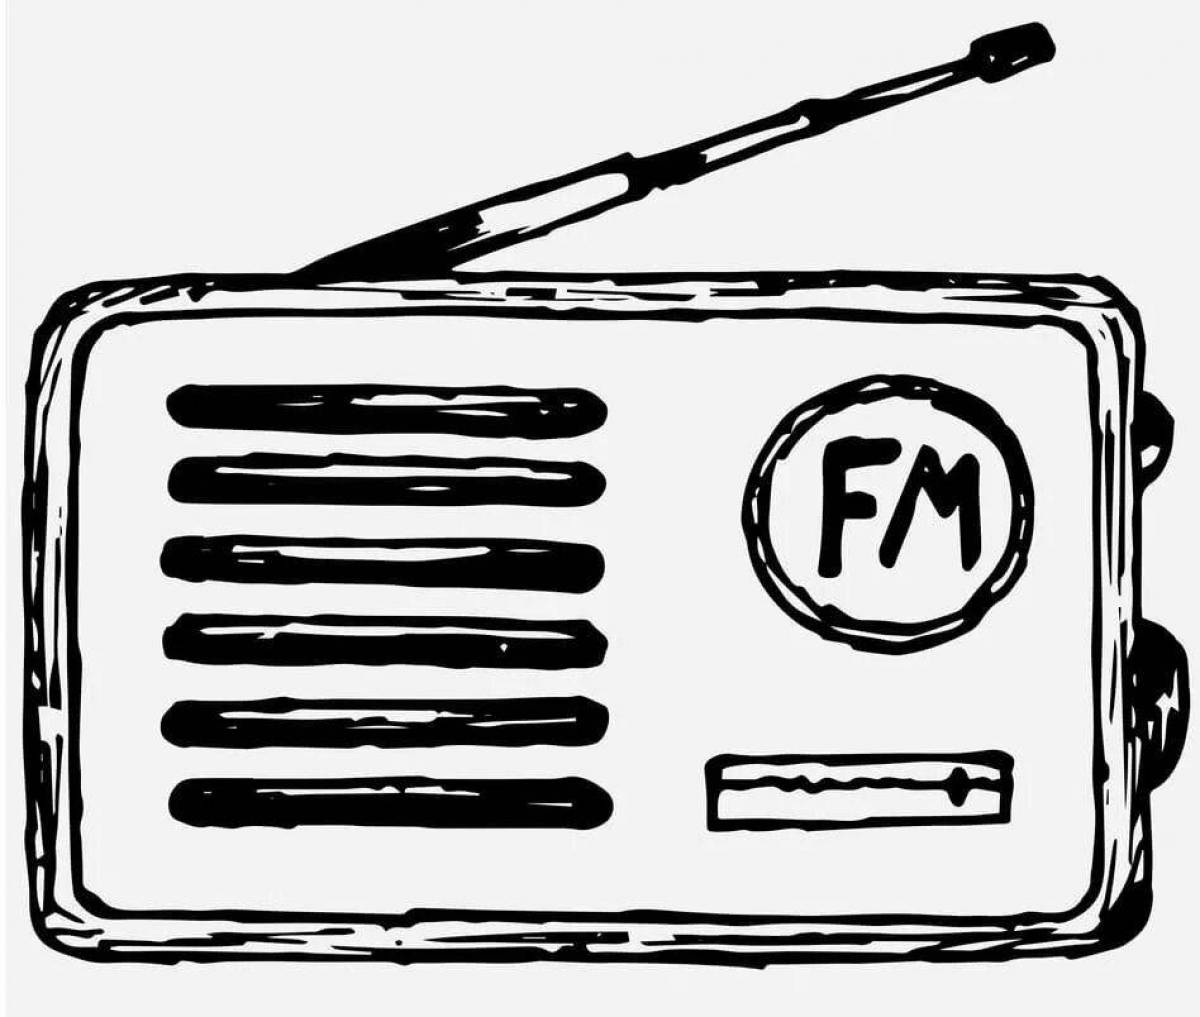 Radio coloring page in vibrant colors